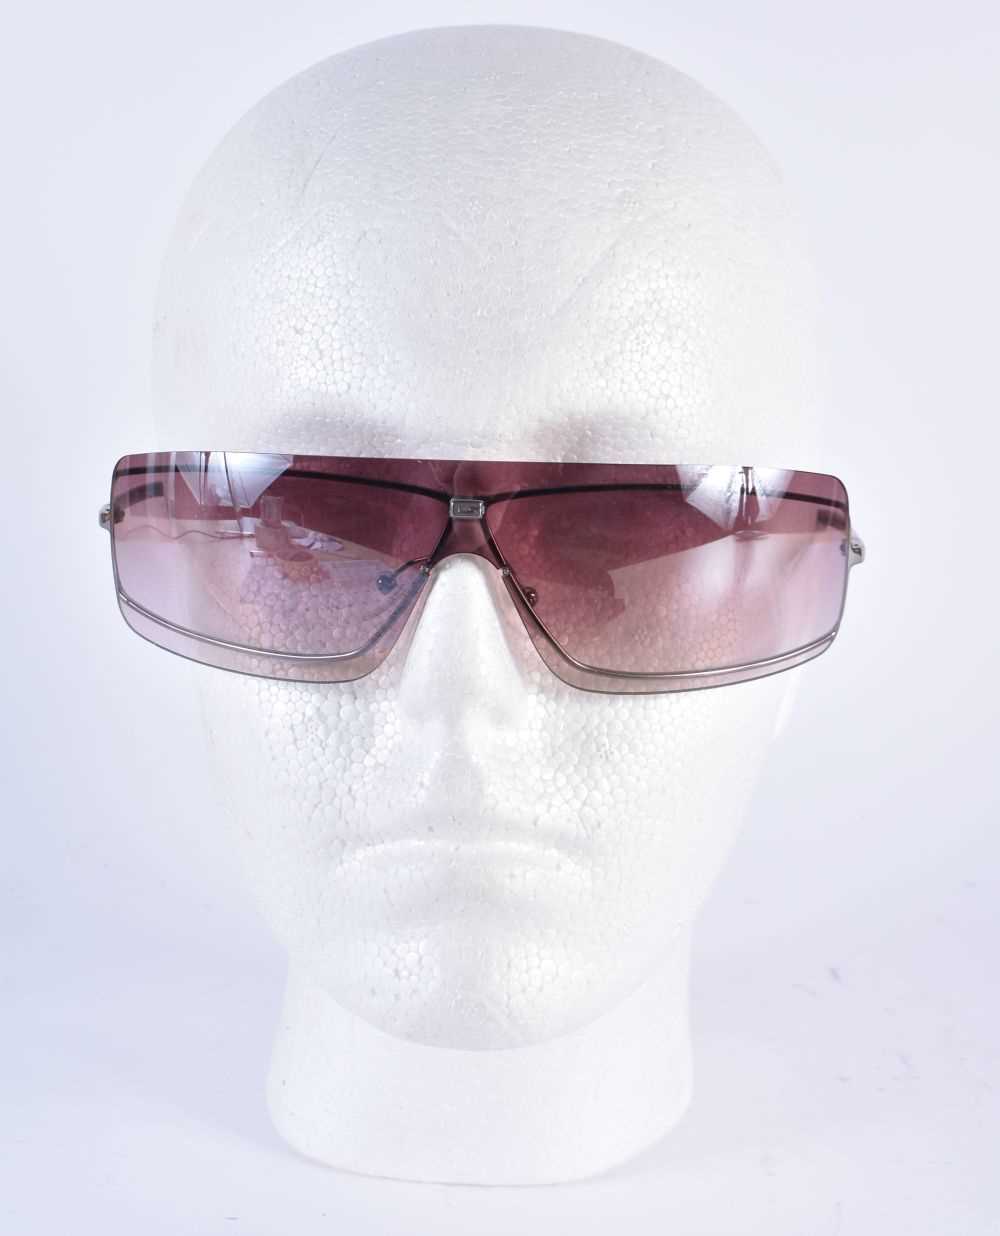 A PAIR OF GUCCI SUNGLASSES. 15 cm wide. - Image 2 of 5